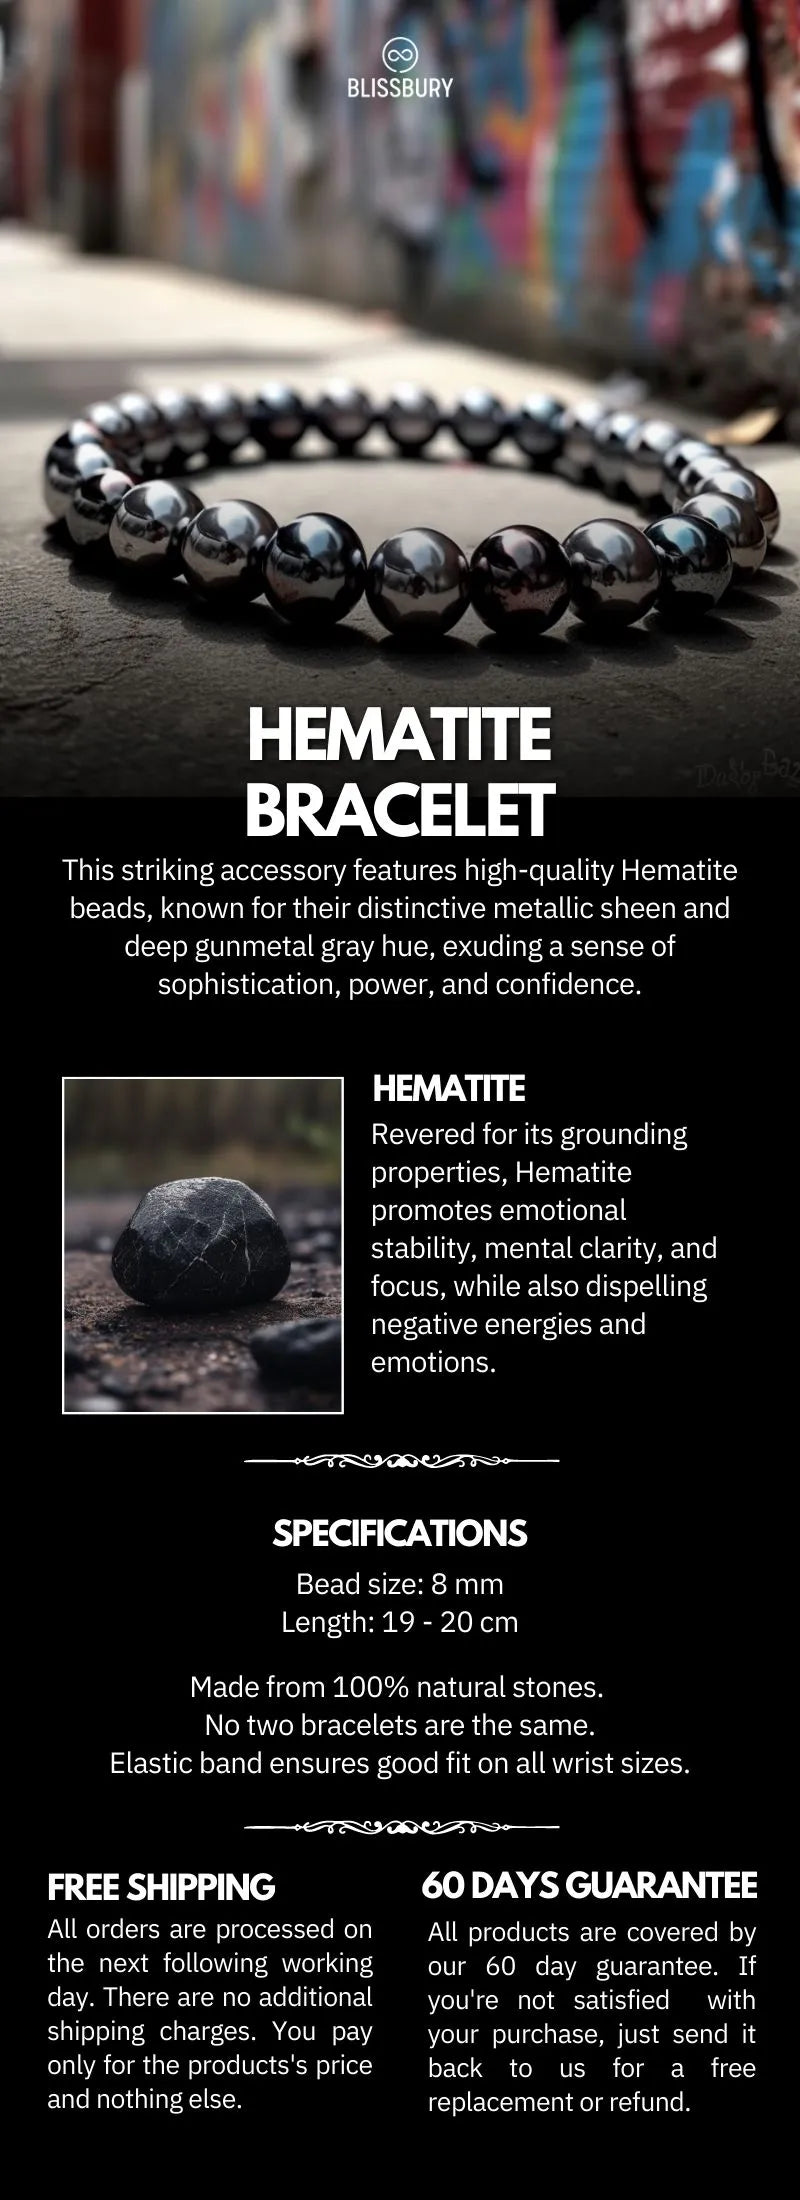 Believe London Hematite Therapy Bracelet With Jewelry Bag & Meaning Card |  Strong Elastic | Precious Natural Stones Healing, One Size, Gemstone,  hematite : Buy Online at Best Price in KSA -